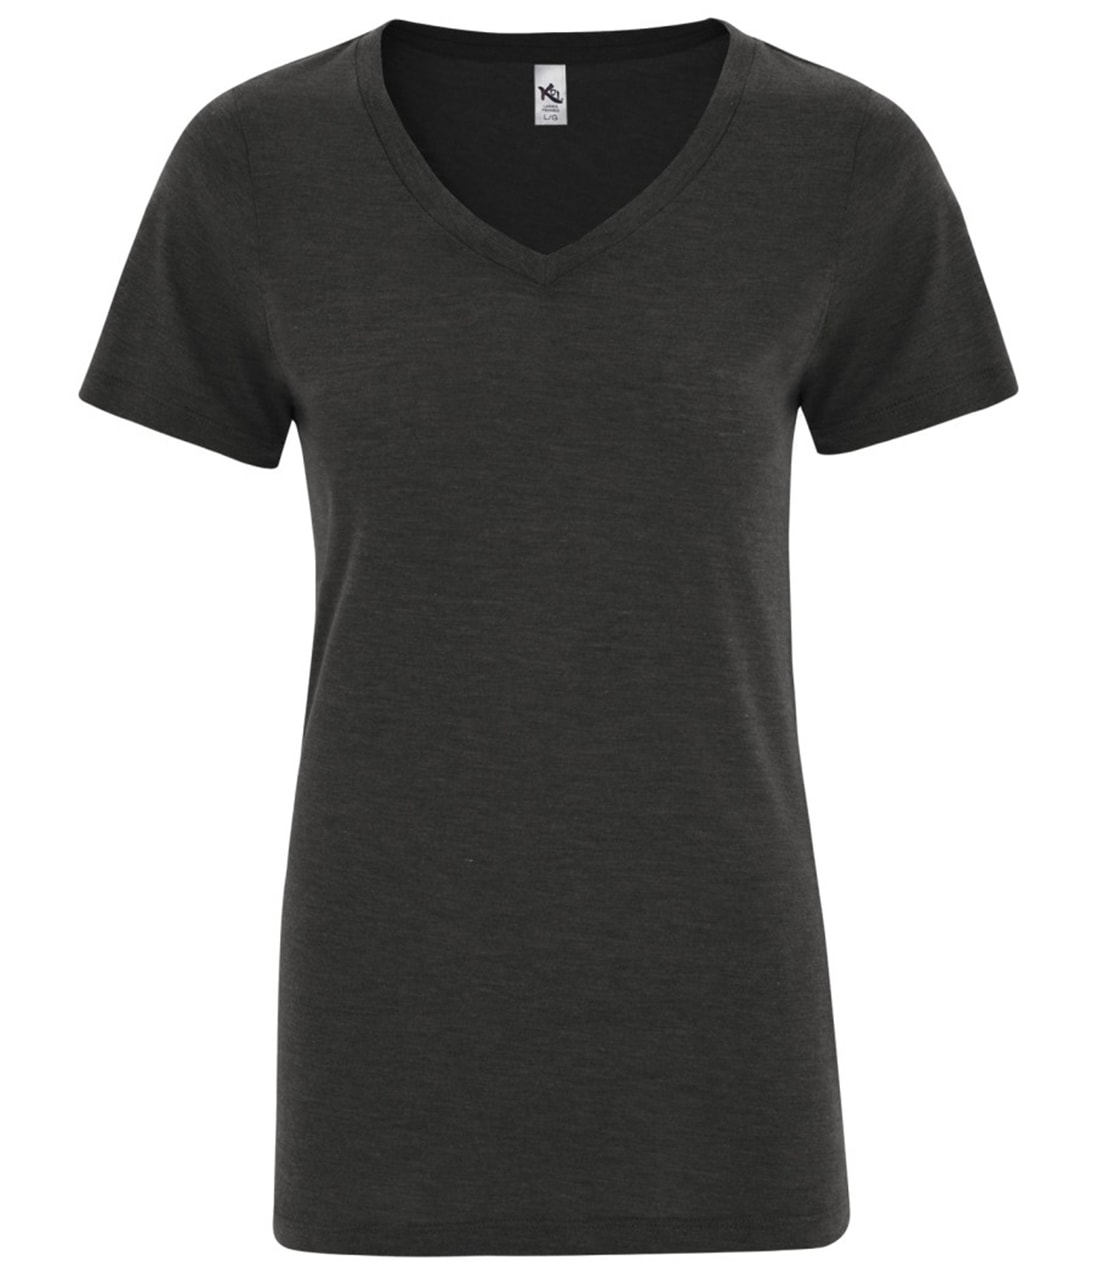 Picture of Koi Triblend V-Neck Ladies’ Tee